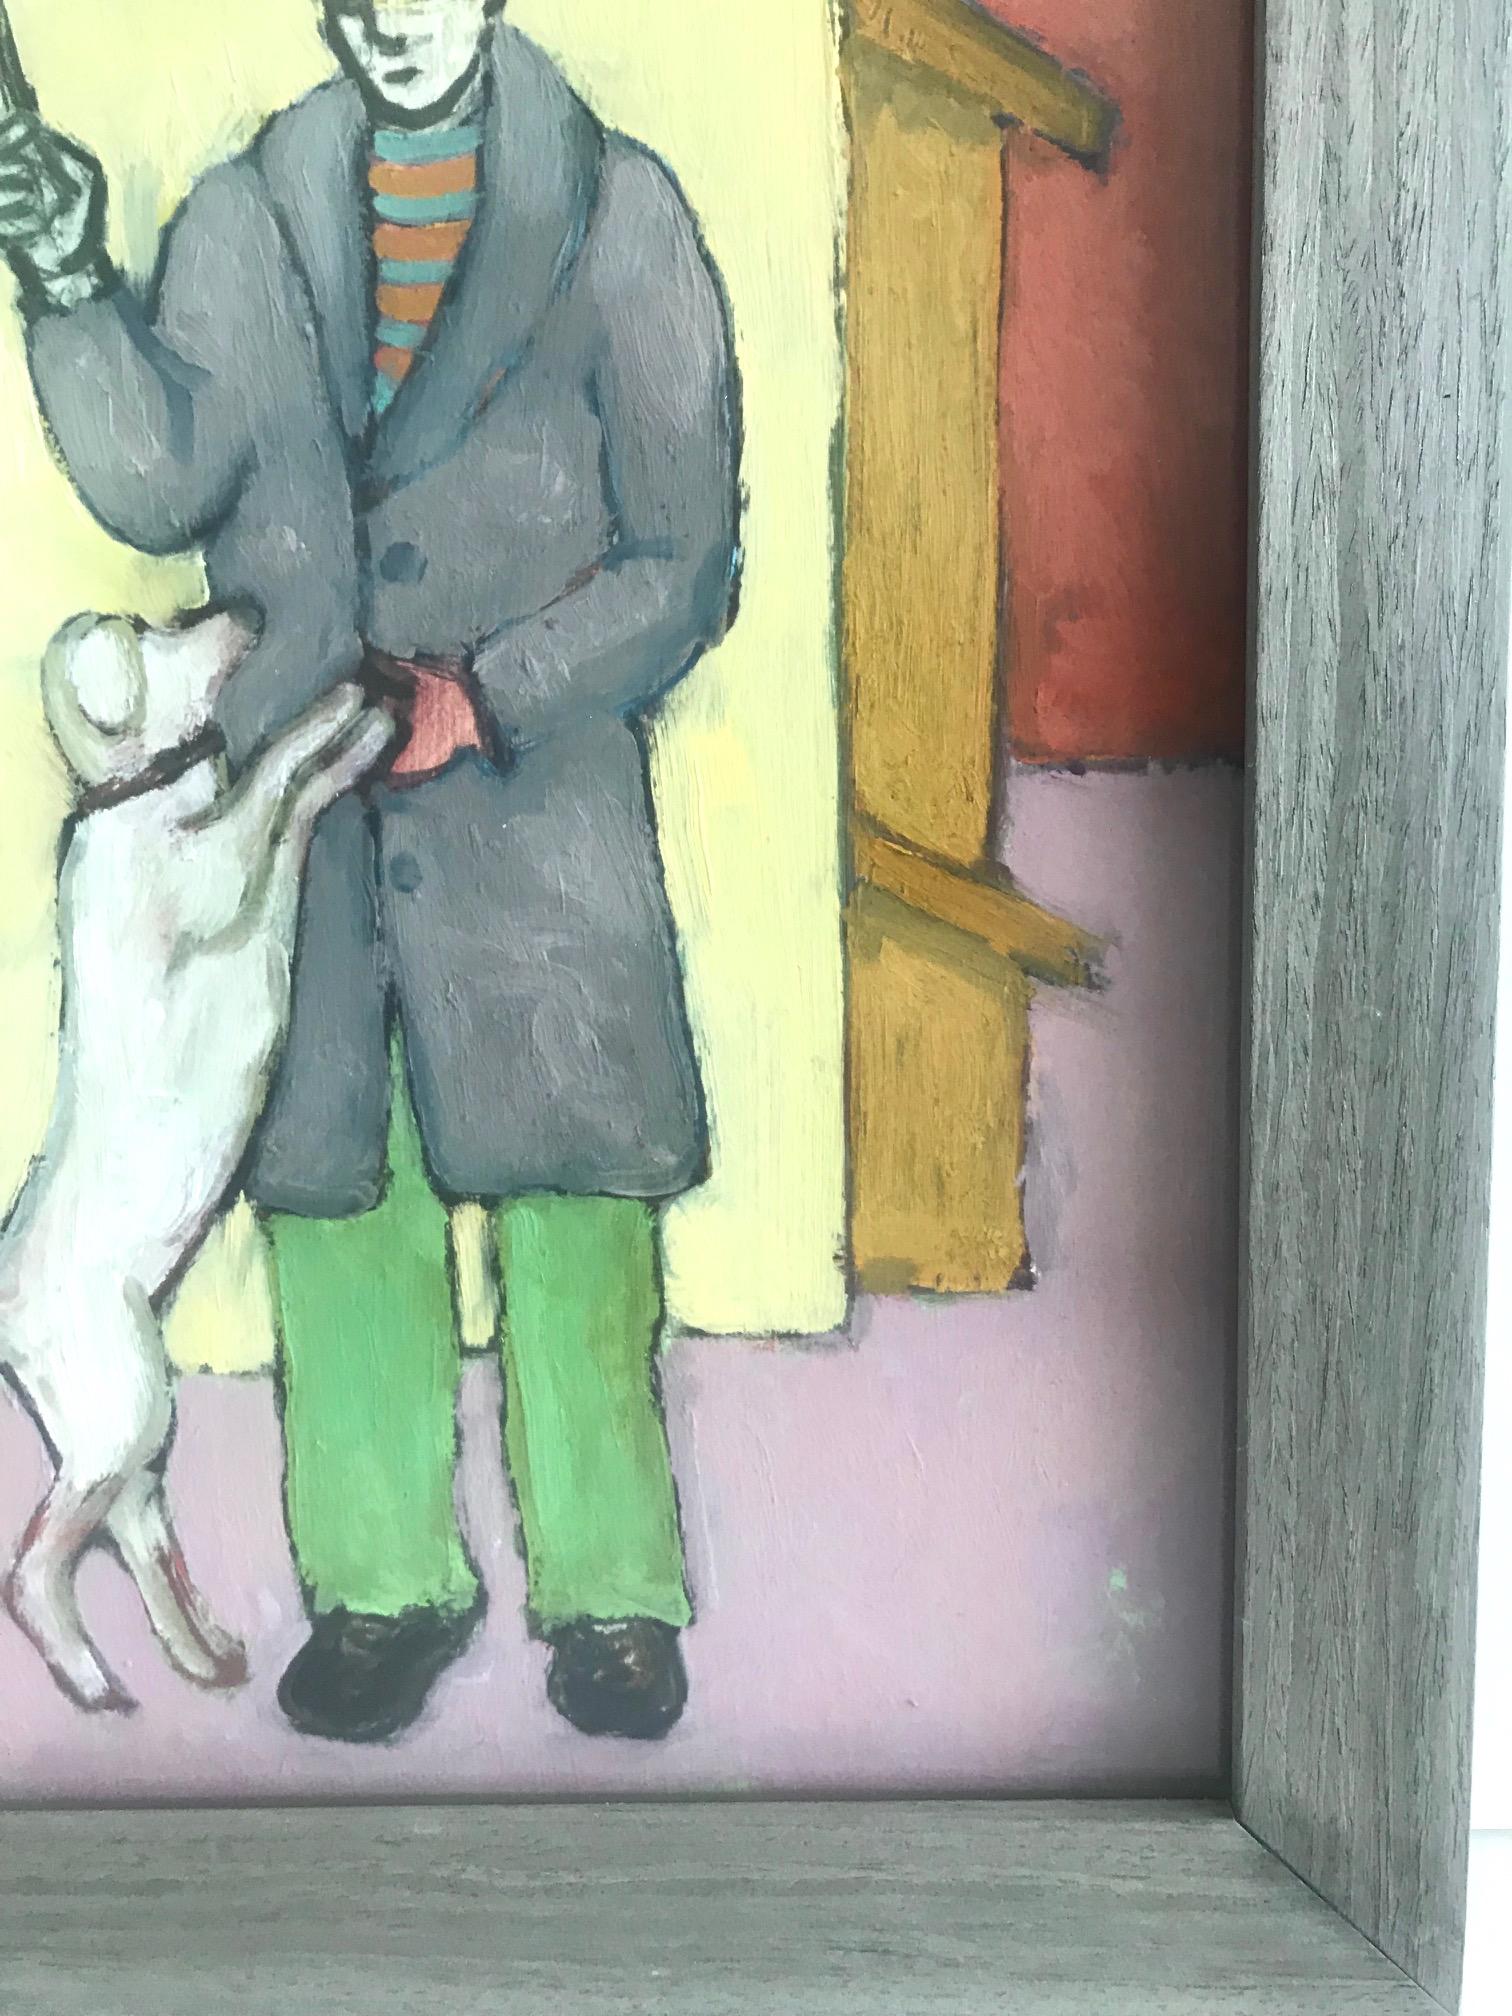 Man with Dog Oil Painting by Tom Gaines, 2003 2